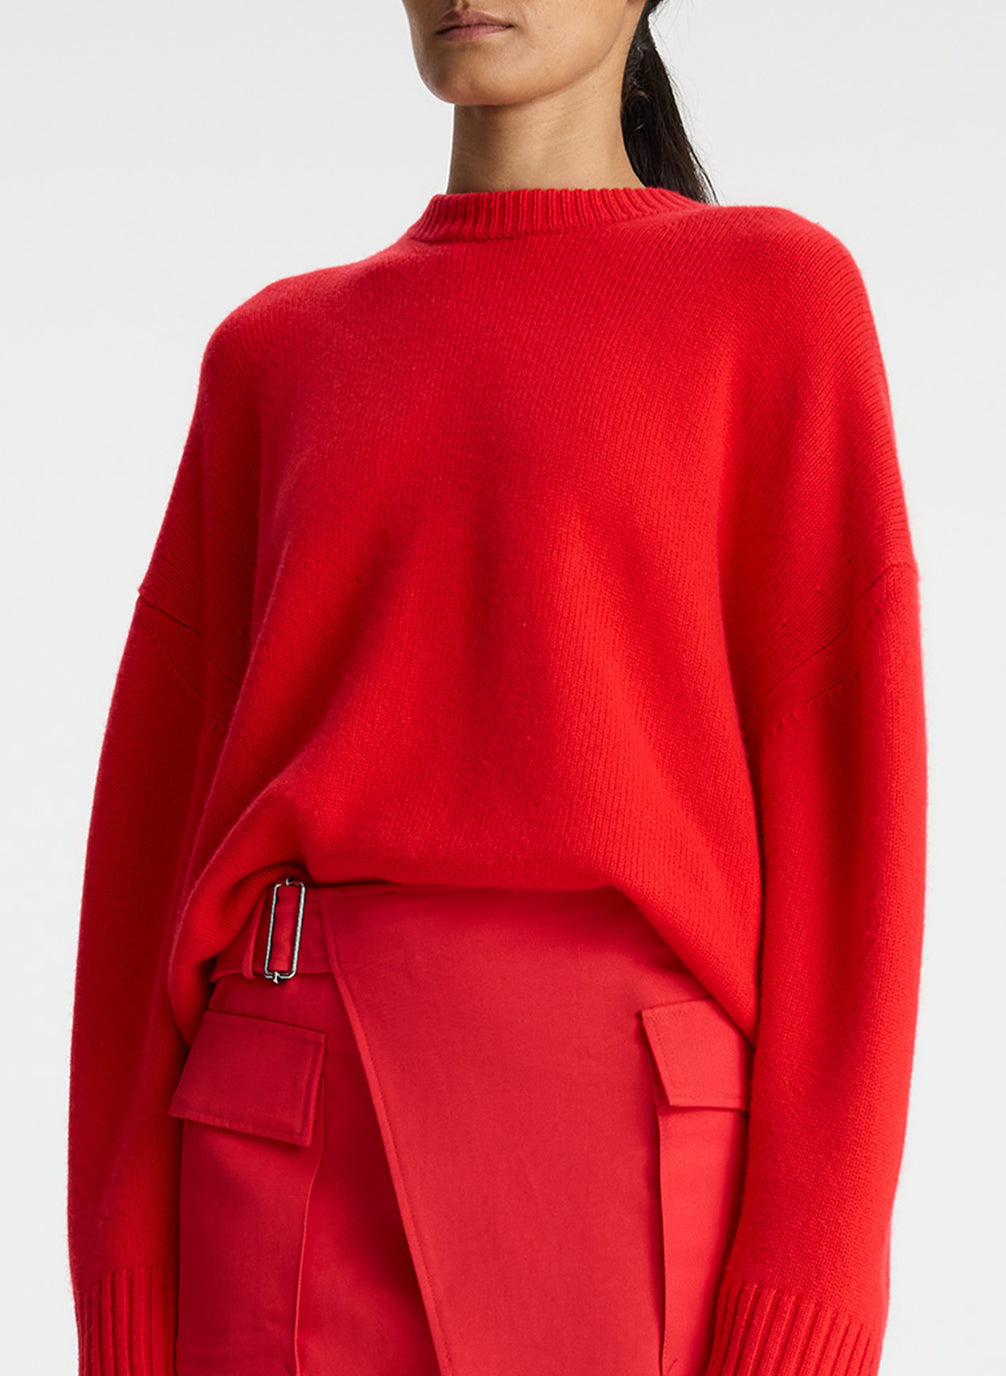 detail view of woman wearing red cashmere long sleeve sweater